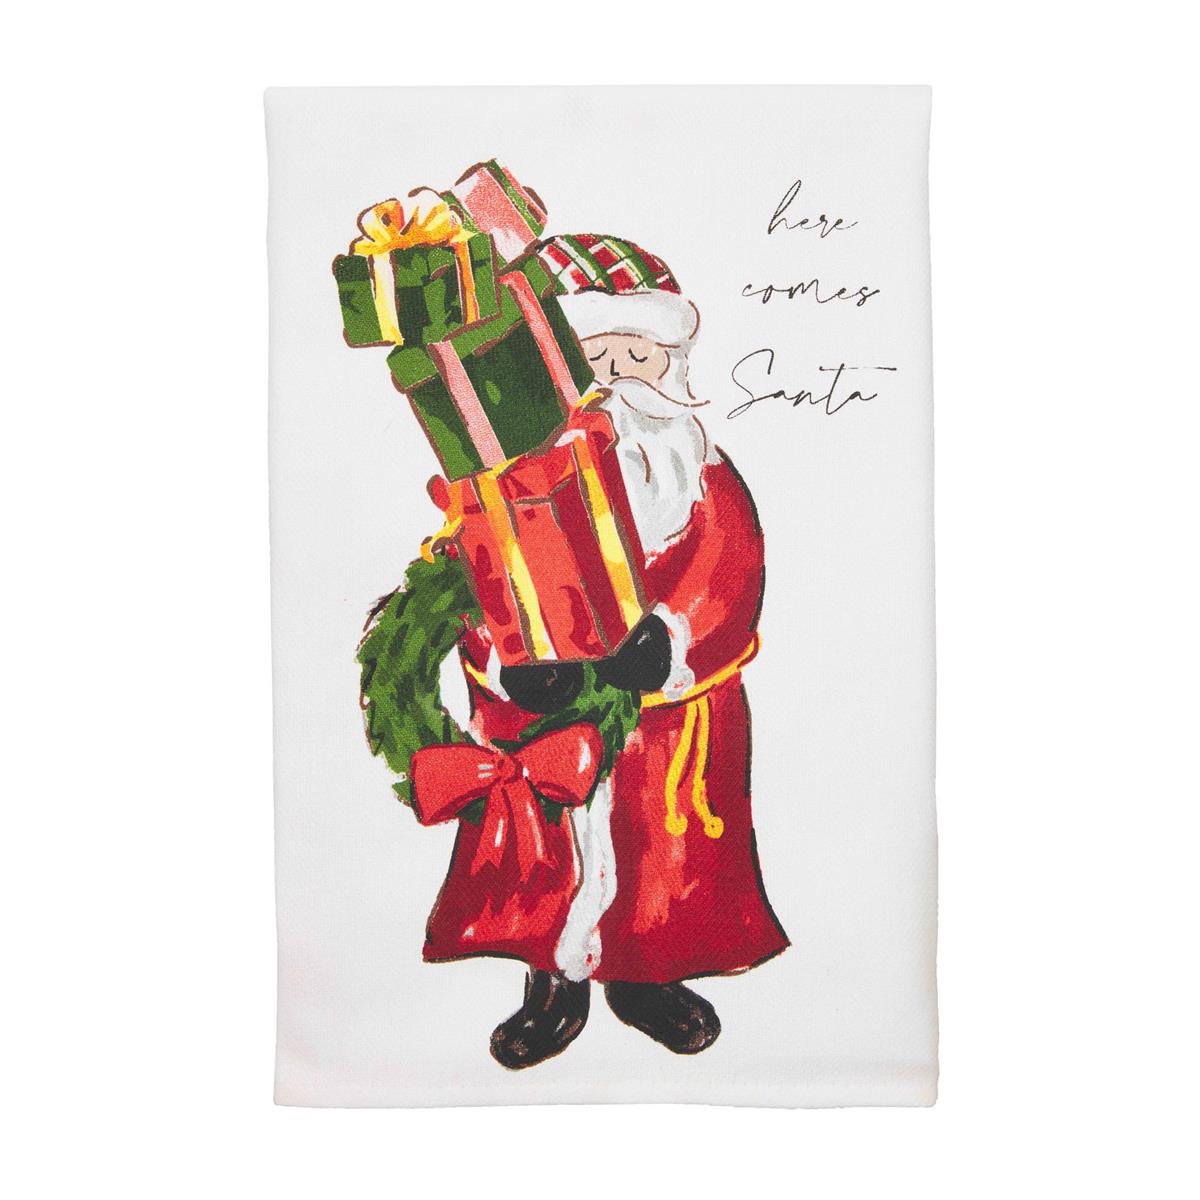 white towel with graphic of santa with fair skin tone holdina stack of gifts and a wreath and the text "here comes santa".